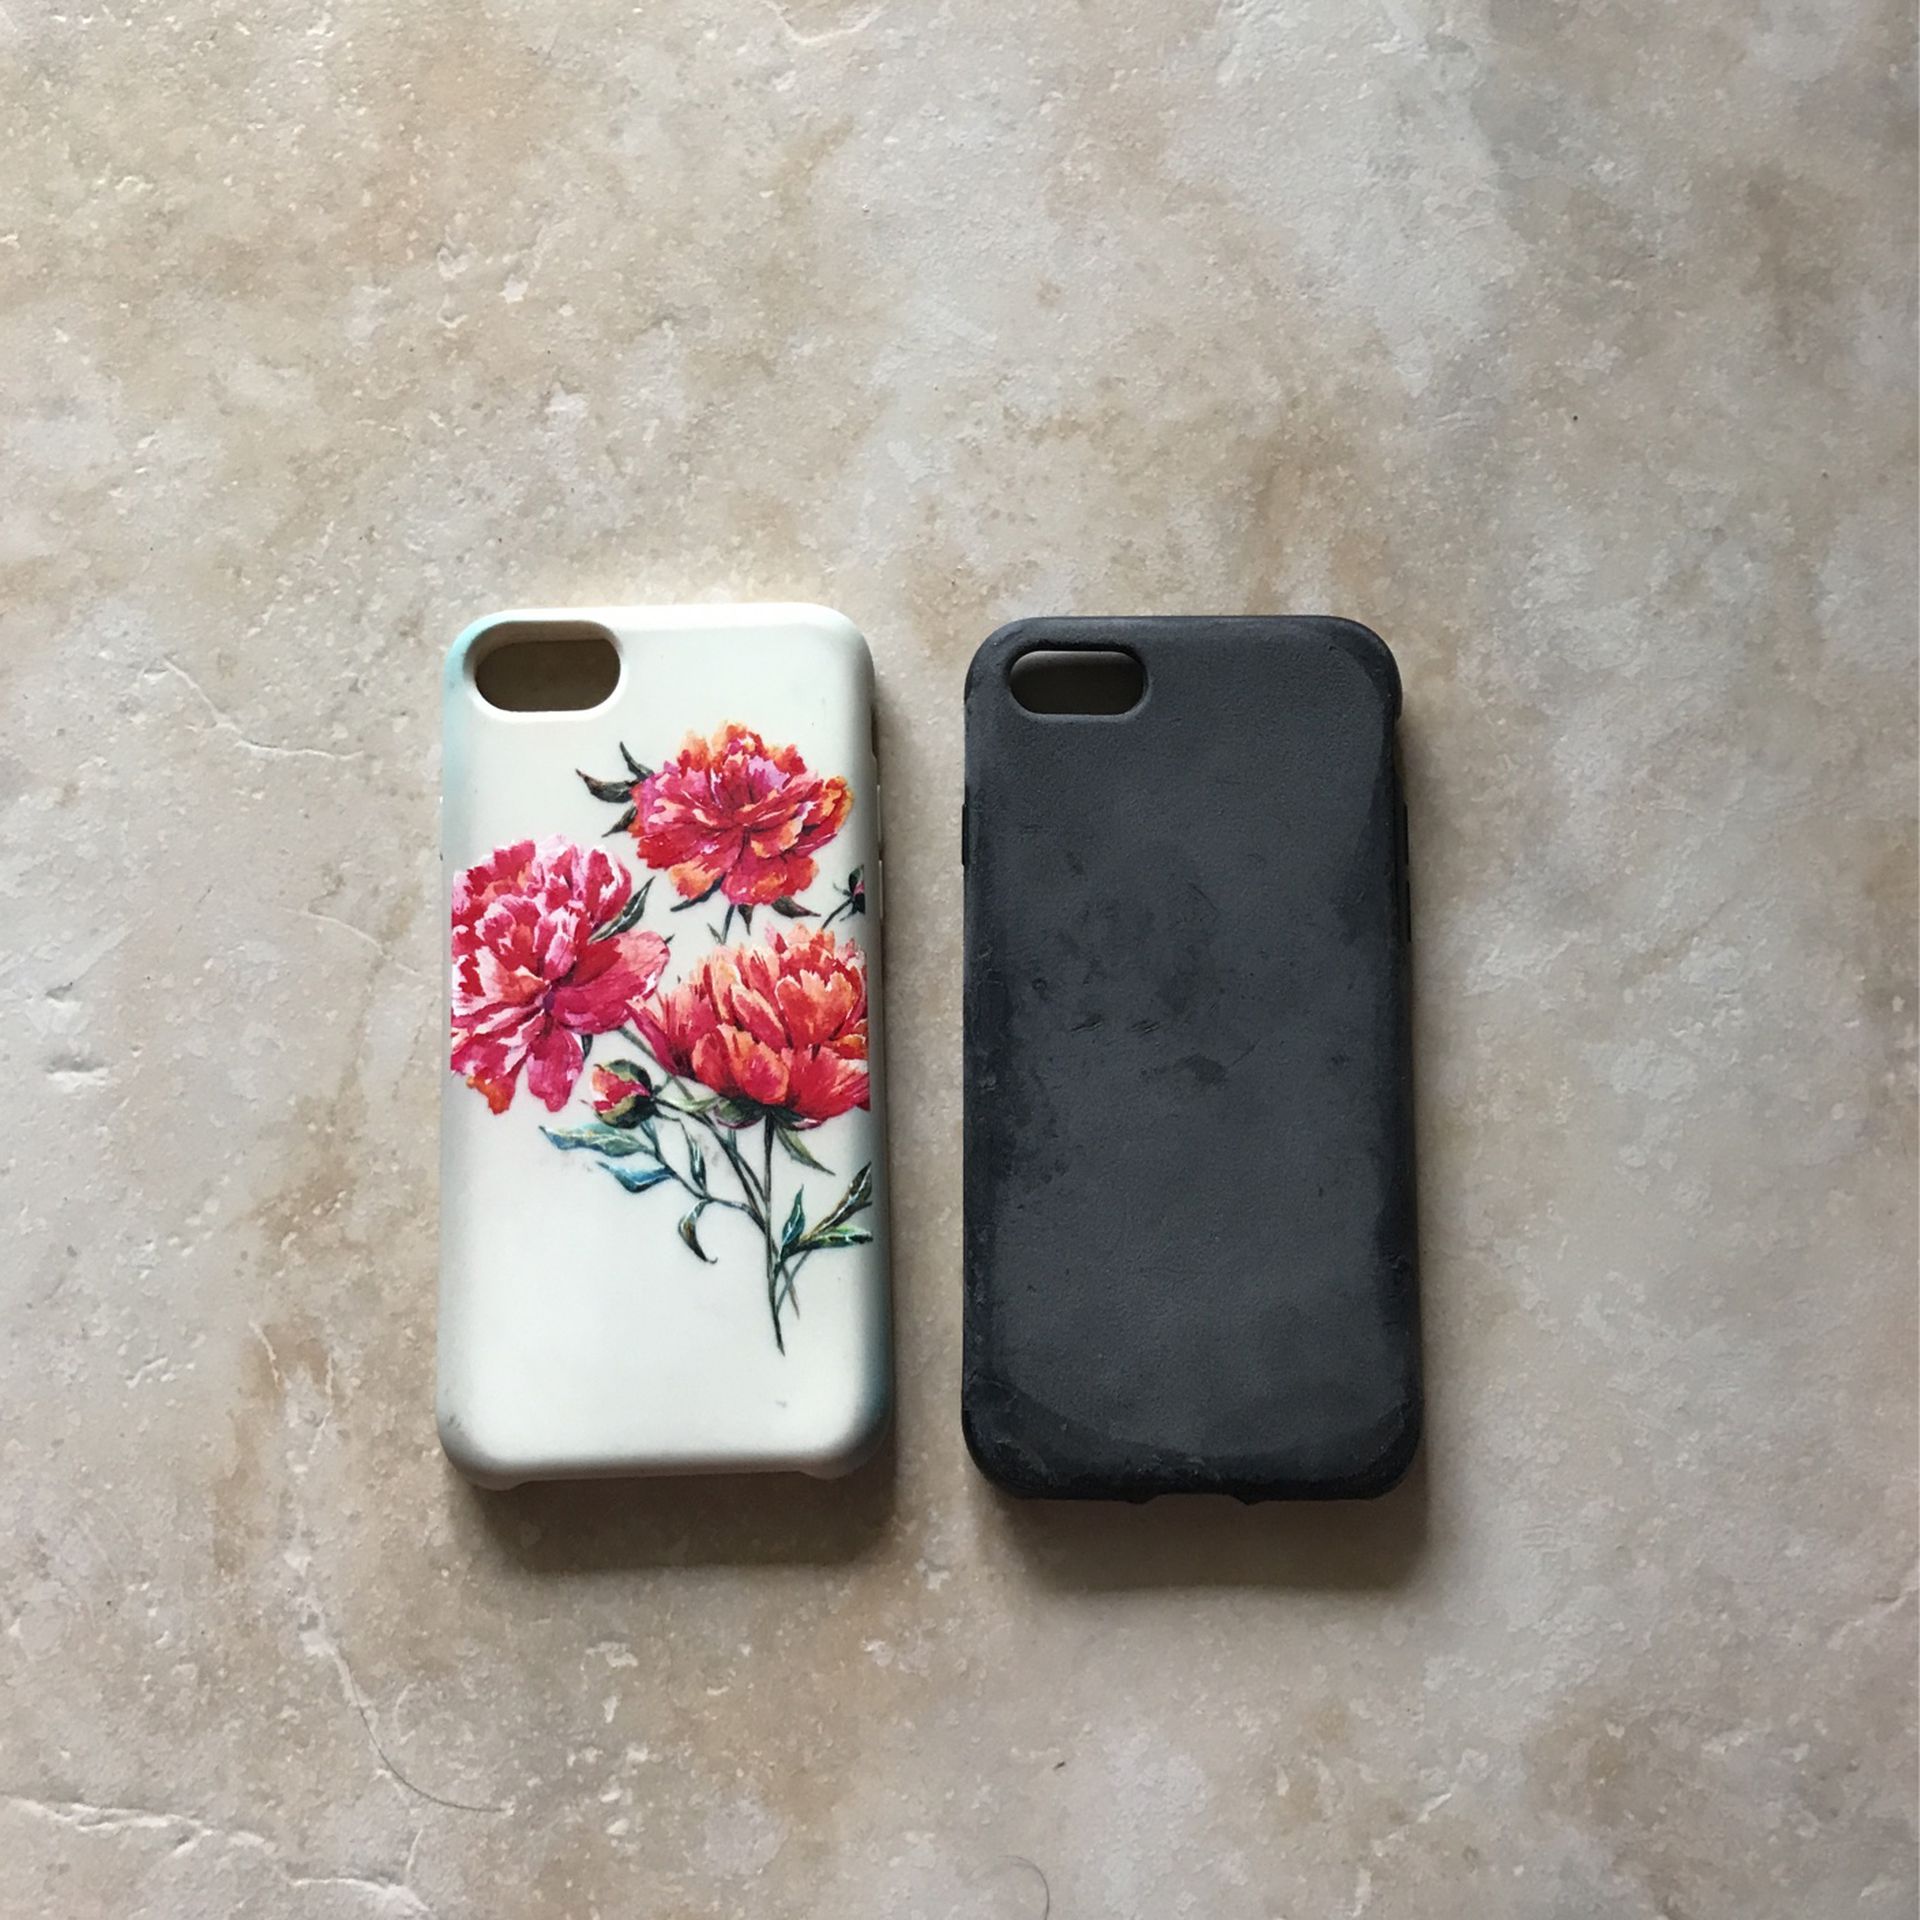 iphone 7, iphone 8, or SE 2020 Phone Cases. Take Both For 3$